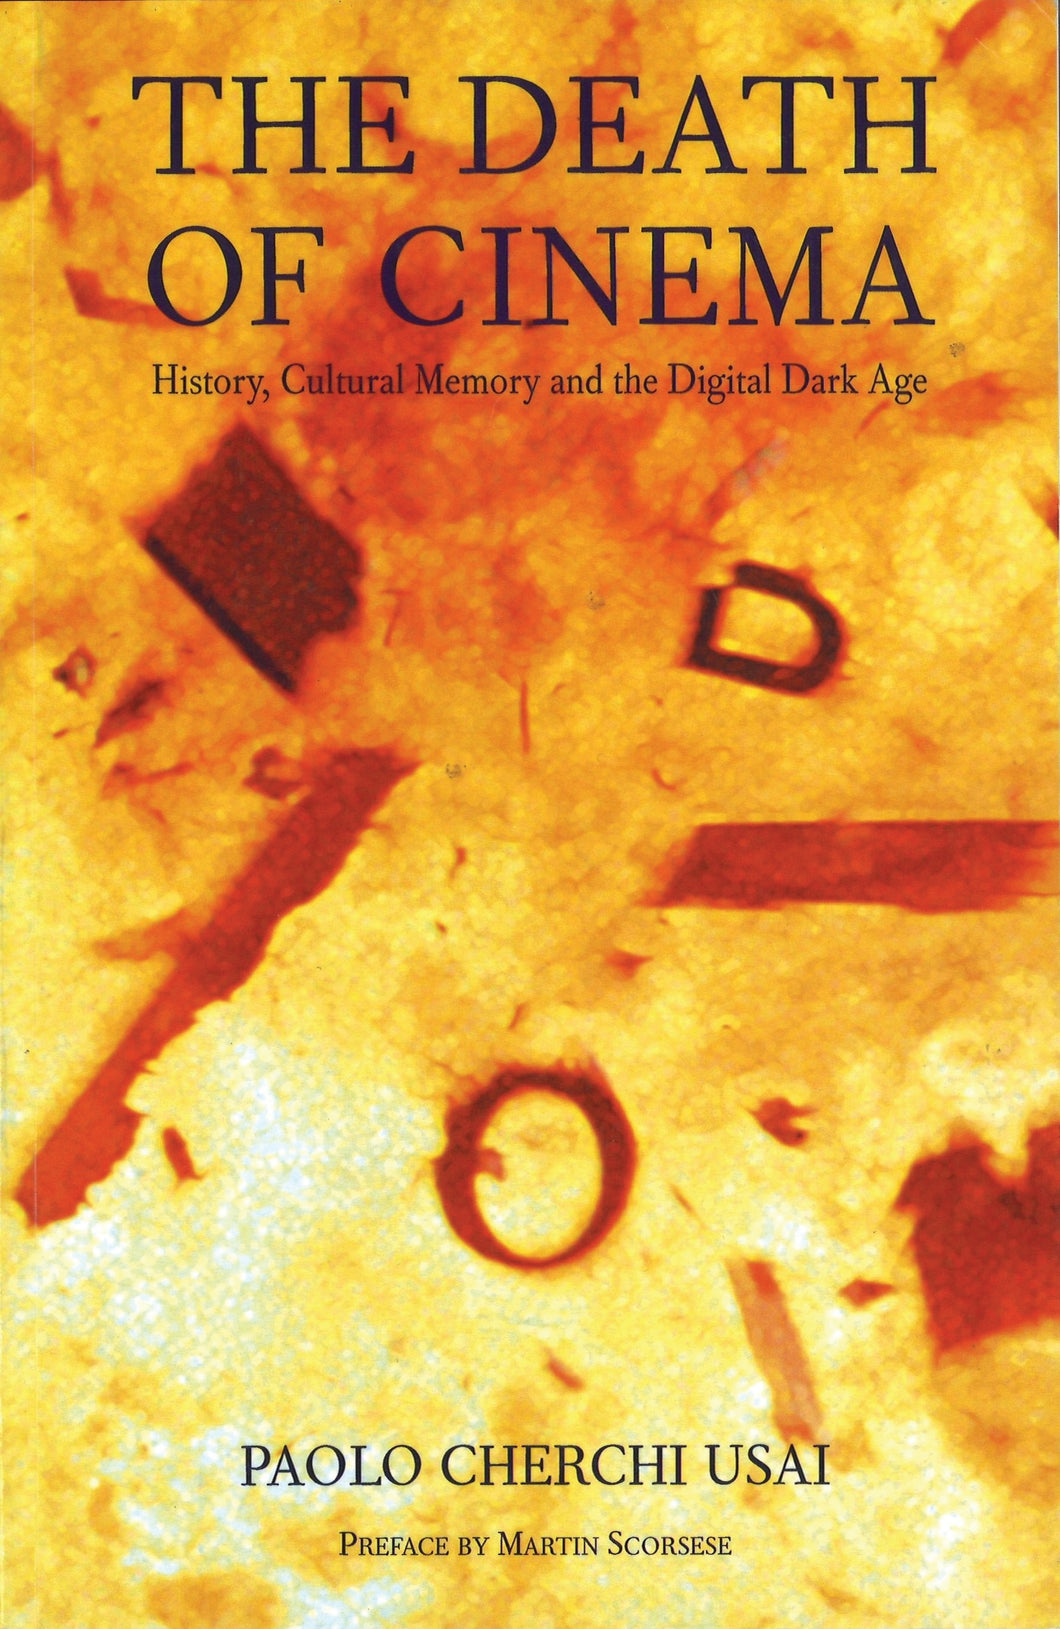 The Death of Cinema: History, Cultural Memory and the Digital Dark Age (2001)